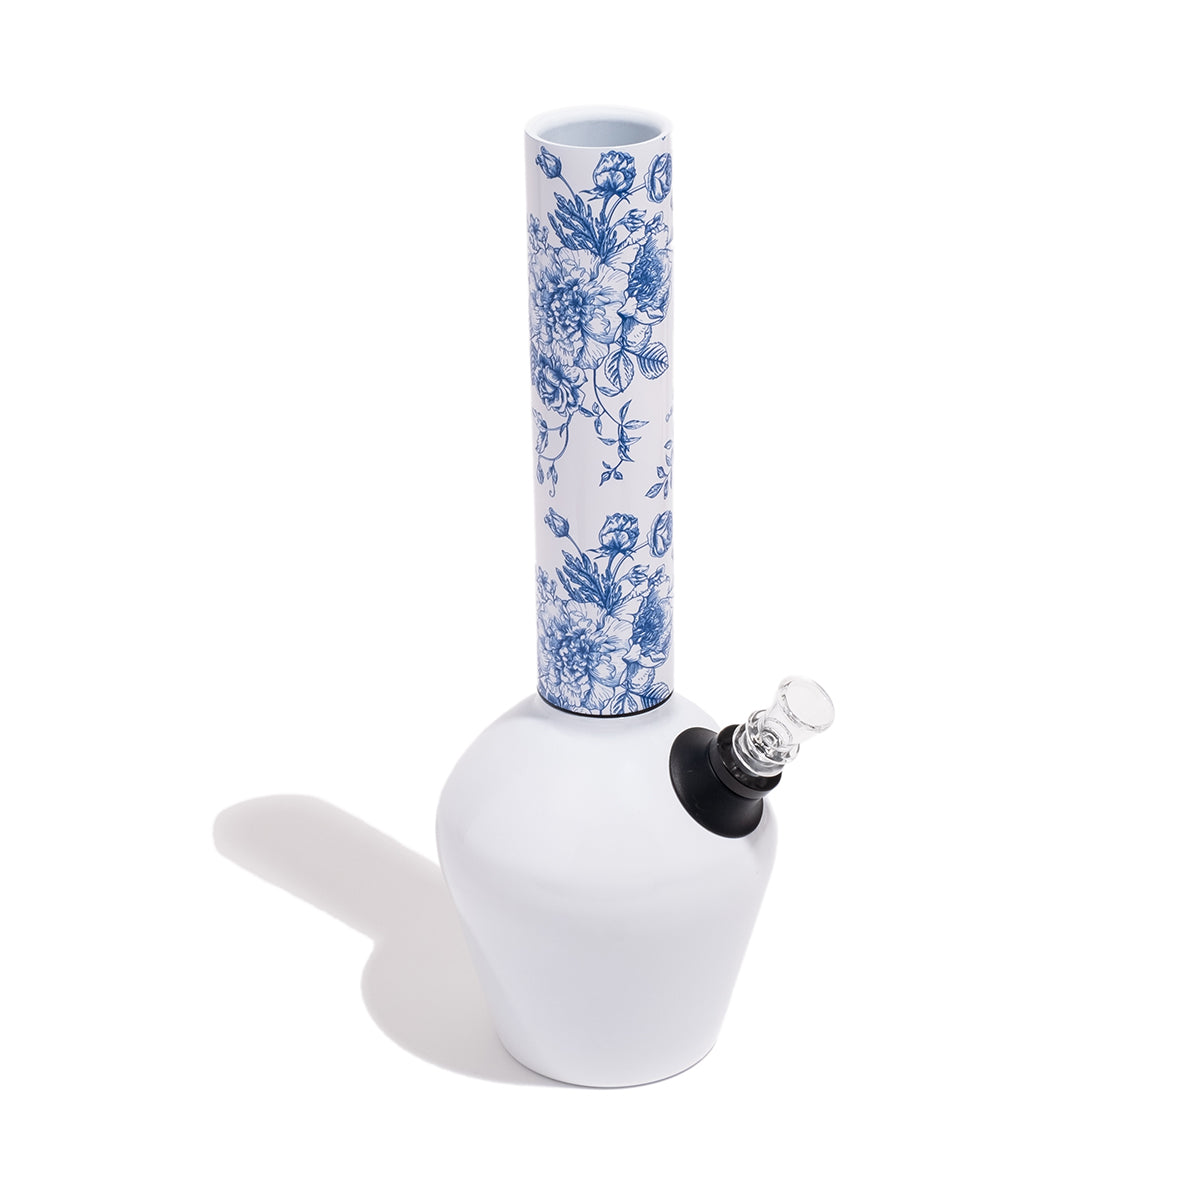 Chill Mix & Match Series Gloss White Base with Blue Floral Design - Top Angle View